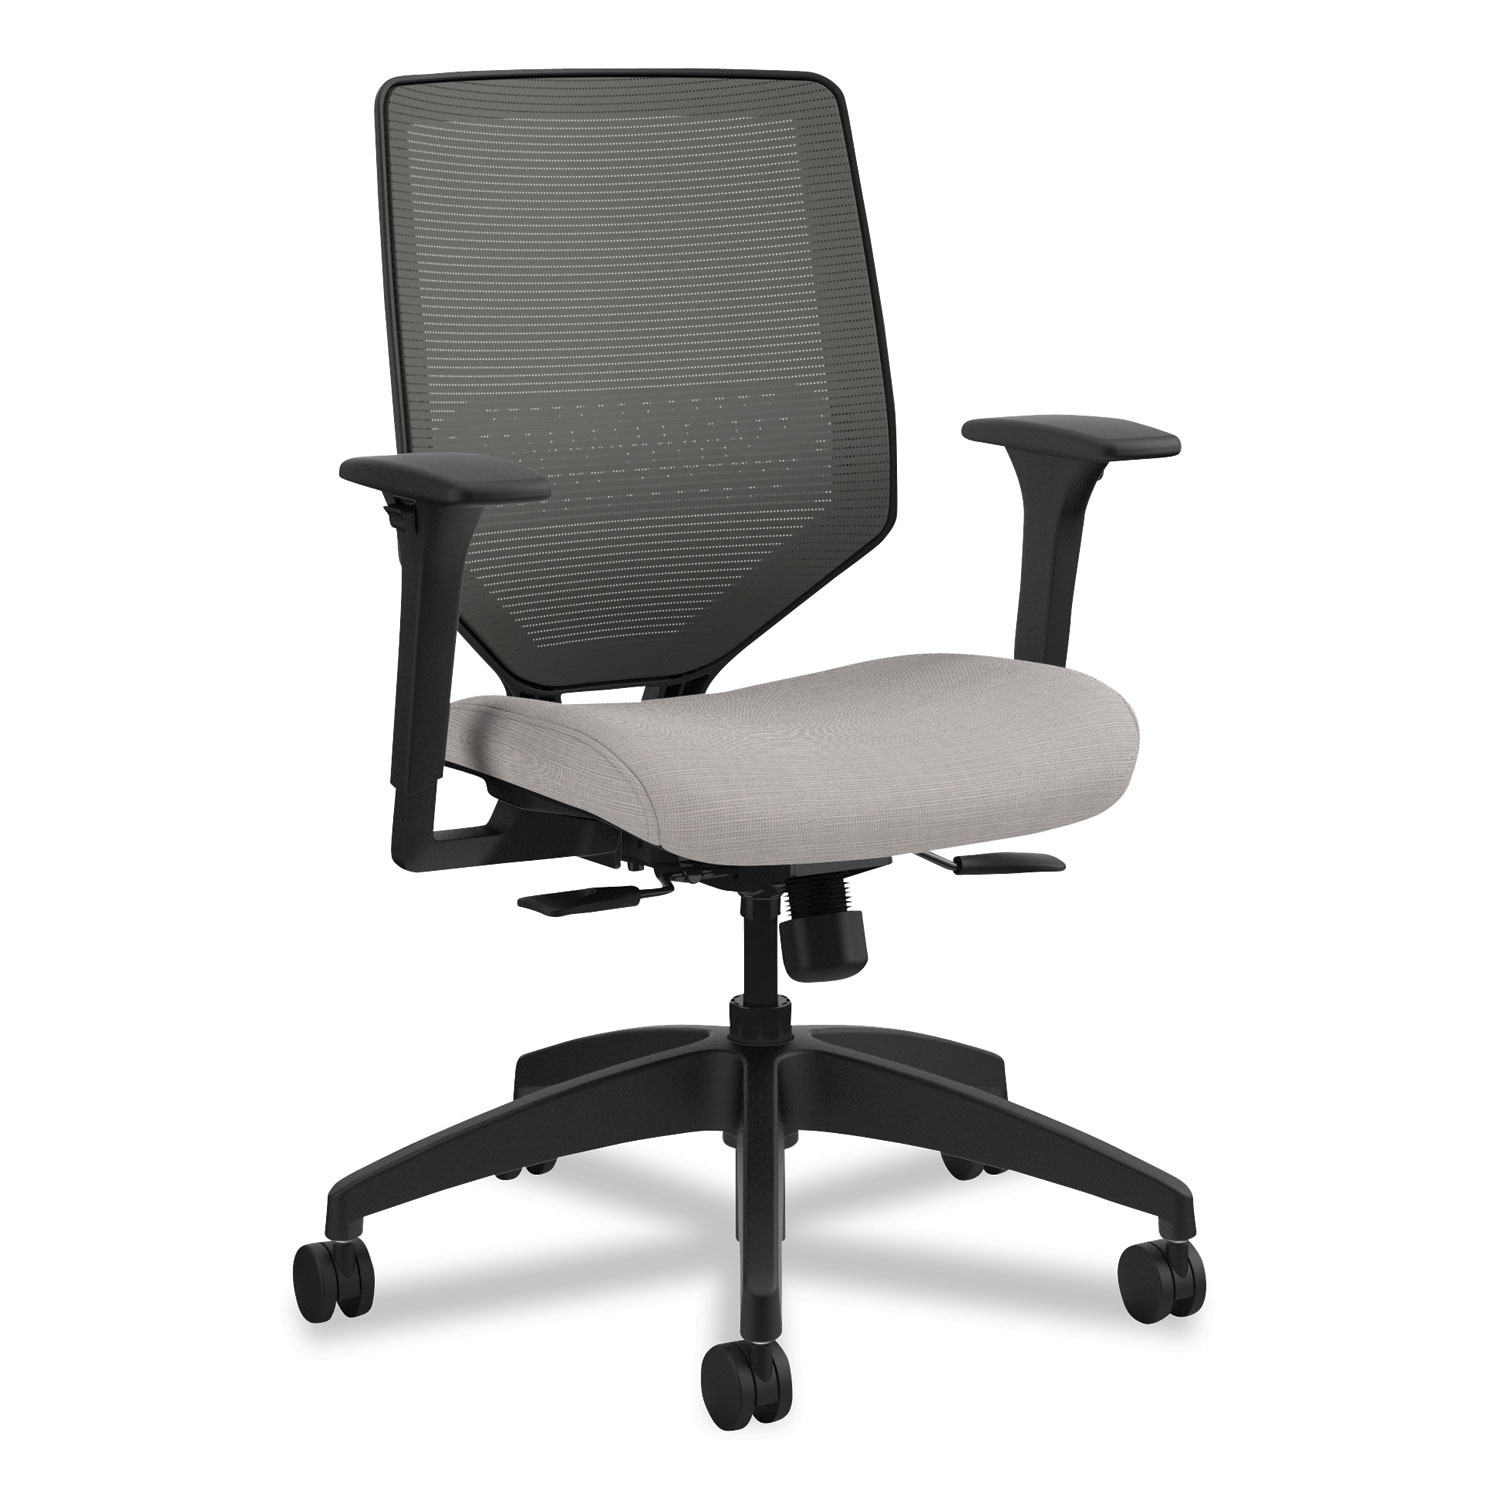  HON HONSVM1ALICC19T Solve Series Mesh Back Task Chair, Supports up to 300 lbs., Sterling Seat, Charcoal Back, Black Base (HONSVM1ALICC19T) 